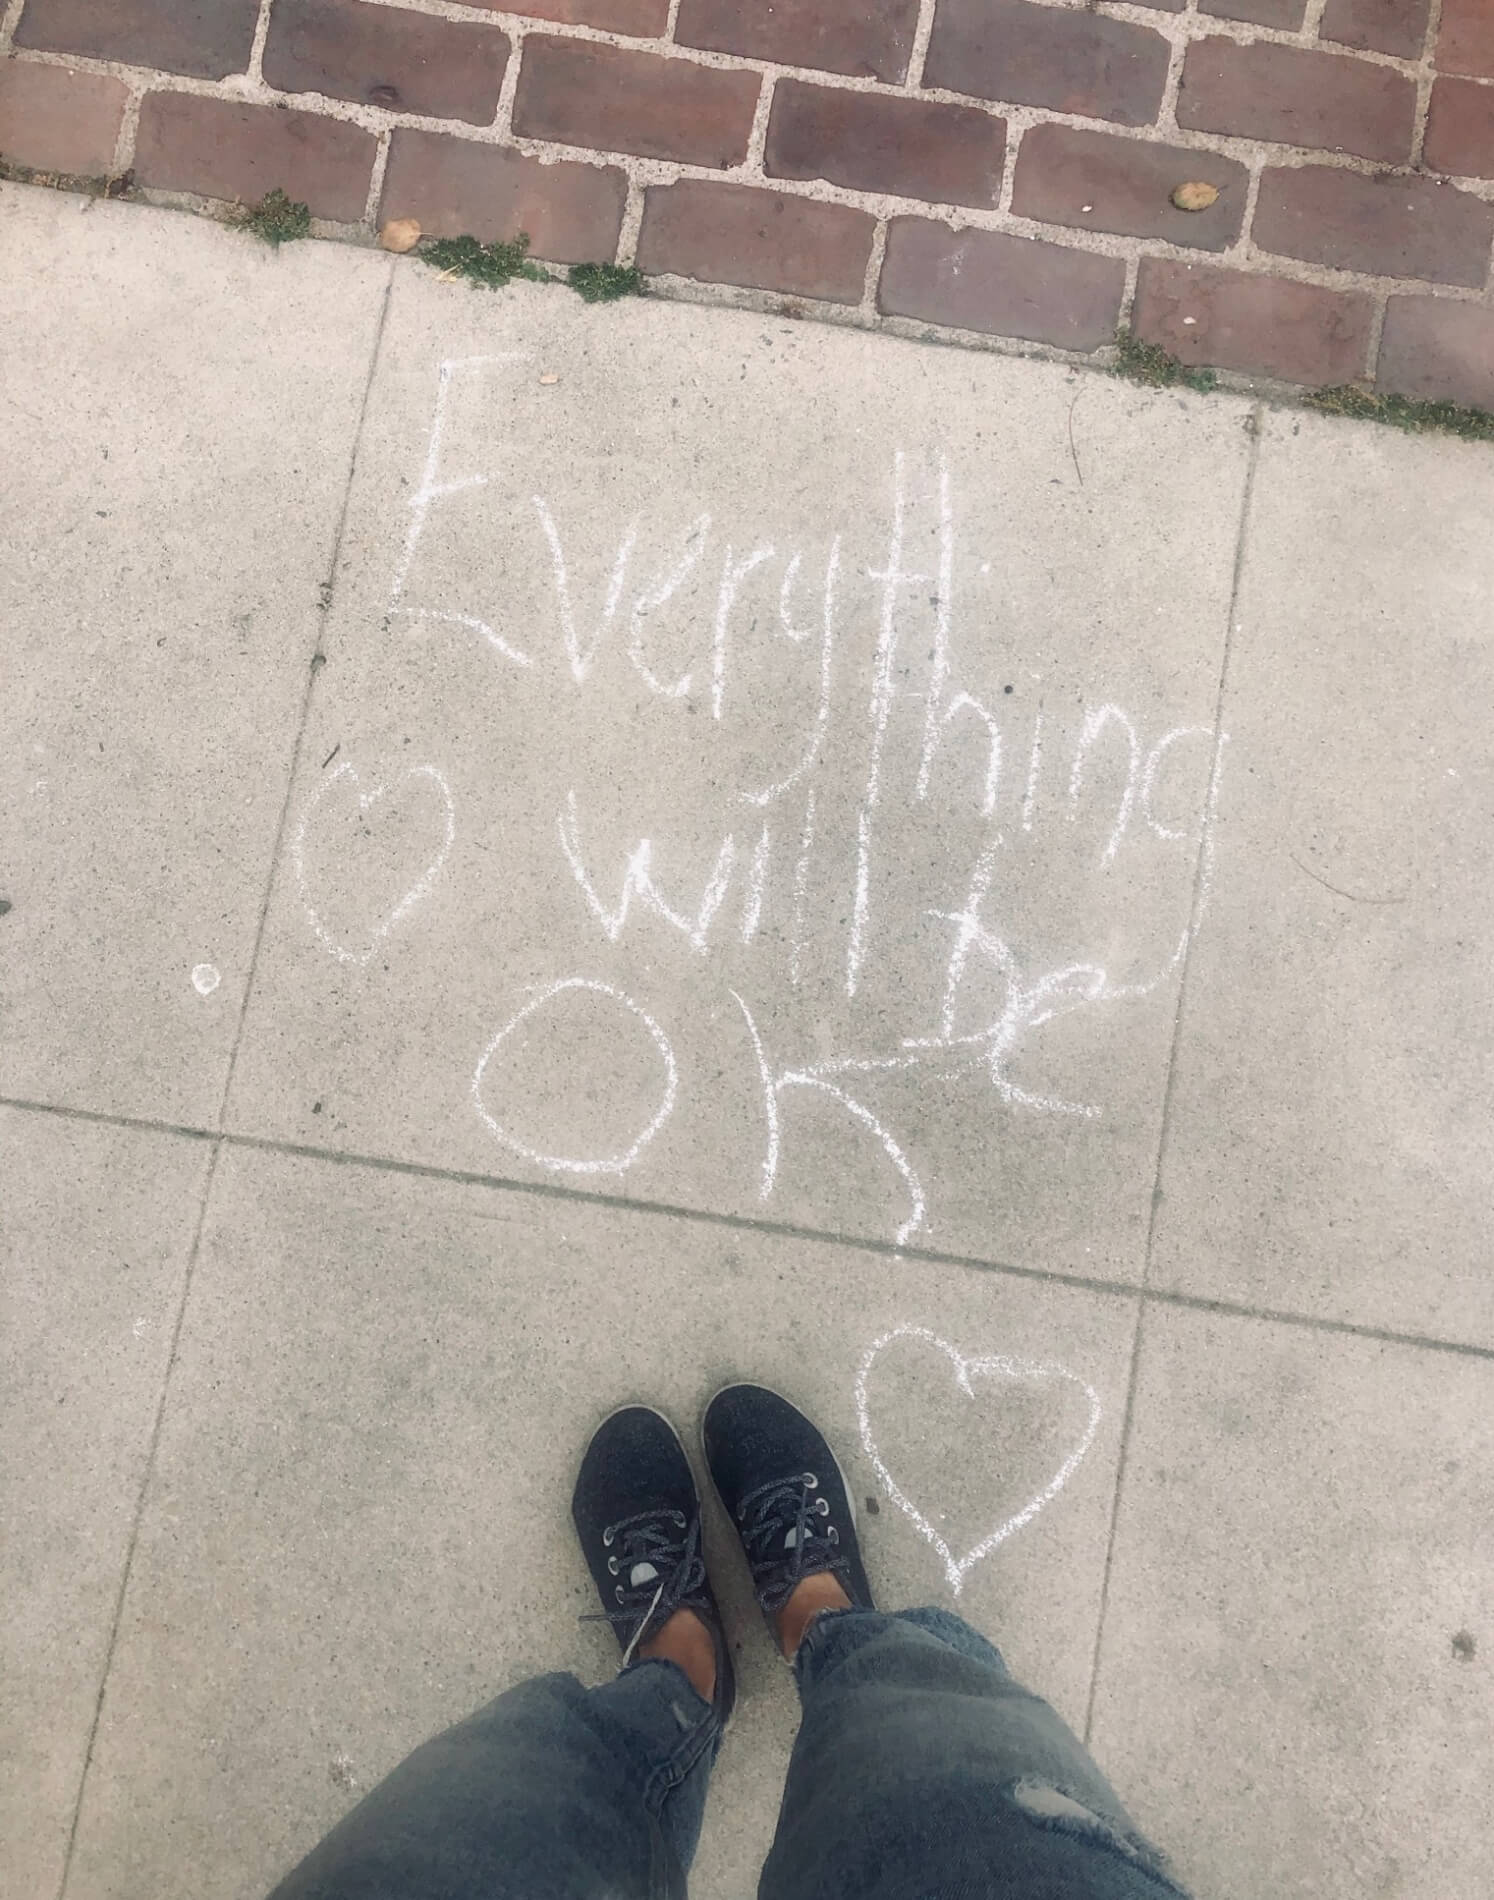 A note written in chalk on a sidewalk says "Everything will be ok"